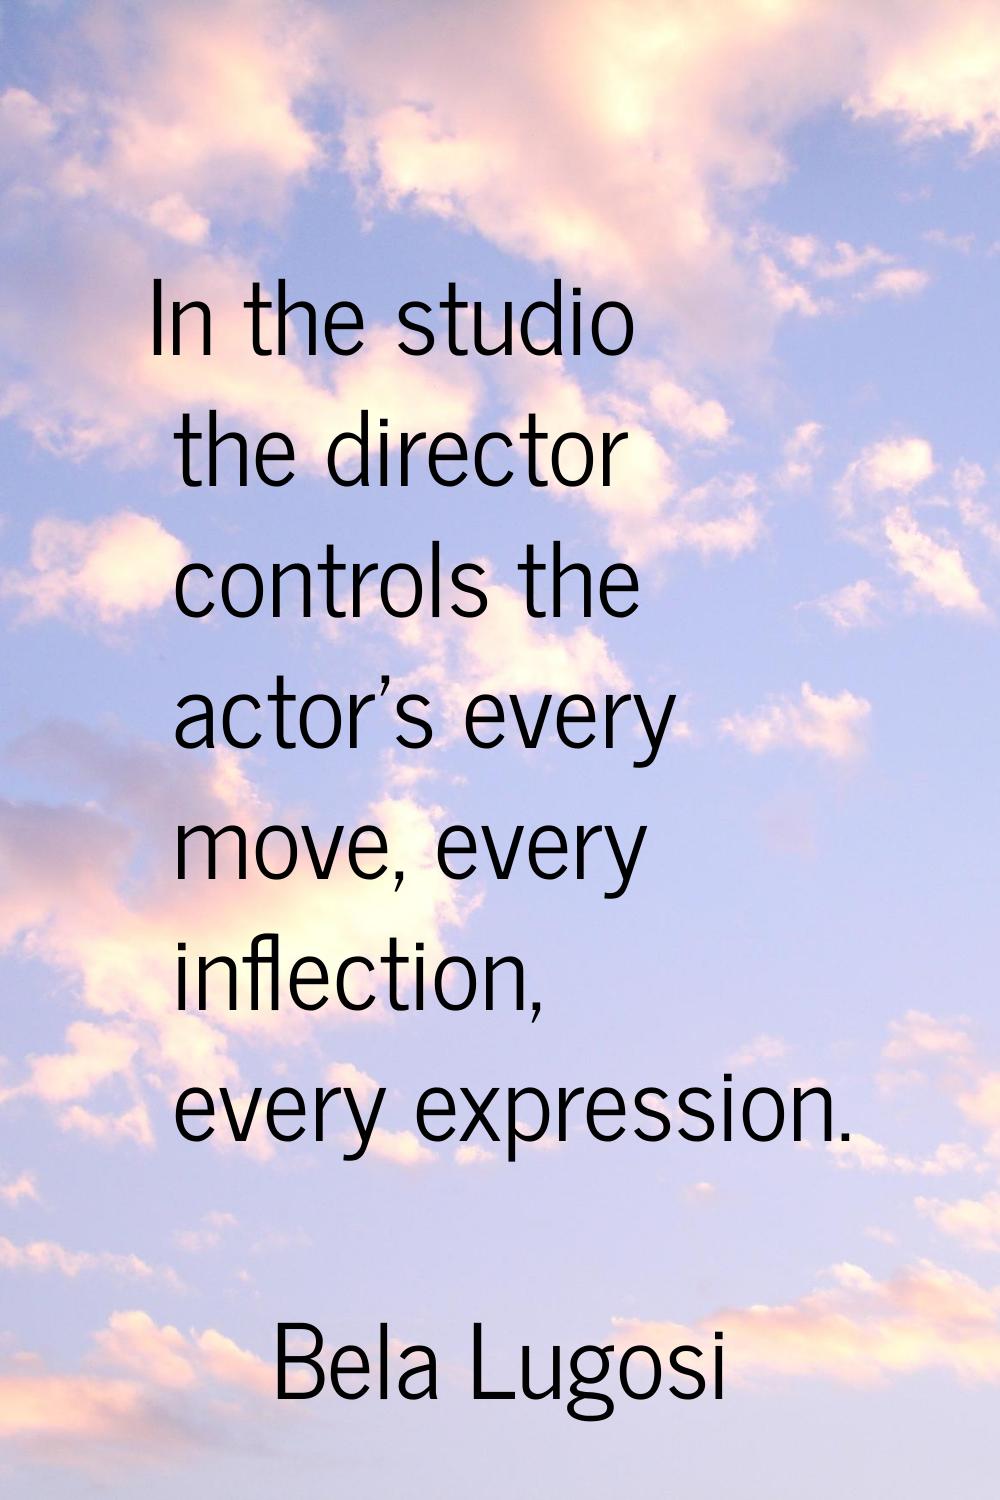 In the studio the director controls the actor's every move, every inflection, every expression.